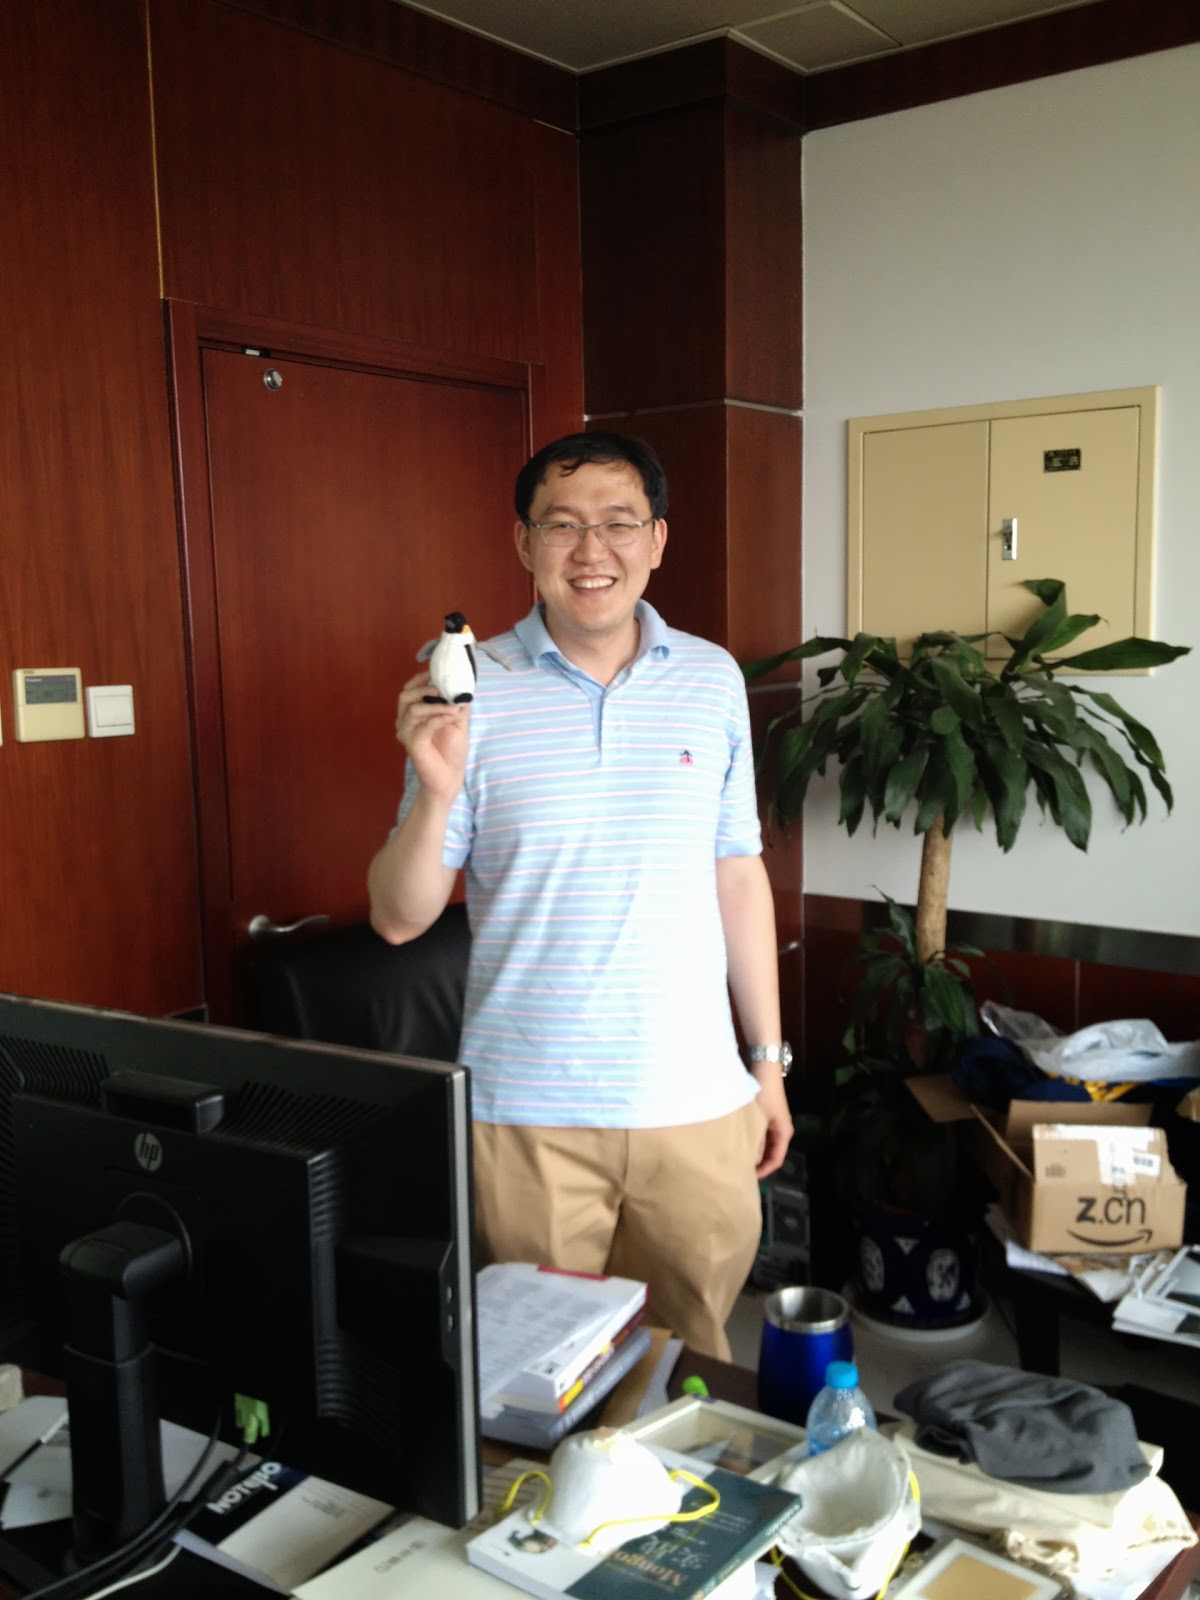 Prof. Wei Xu and Travel Penguin.  Wei recently received a shipment from Amazon China, as you can see the box at right